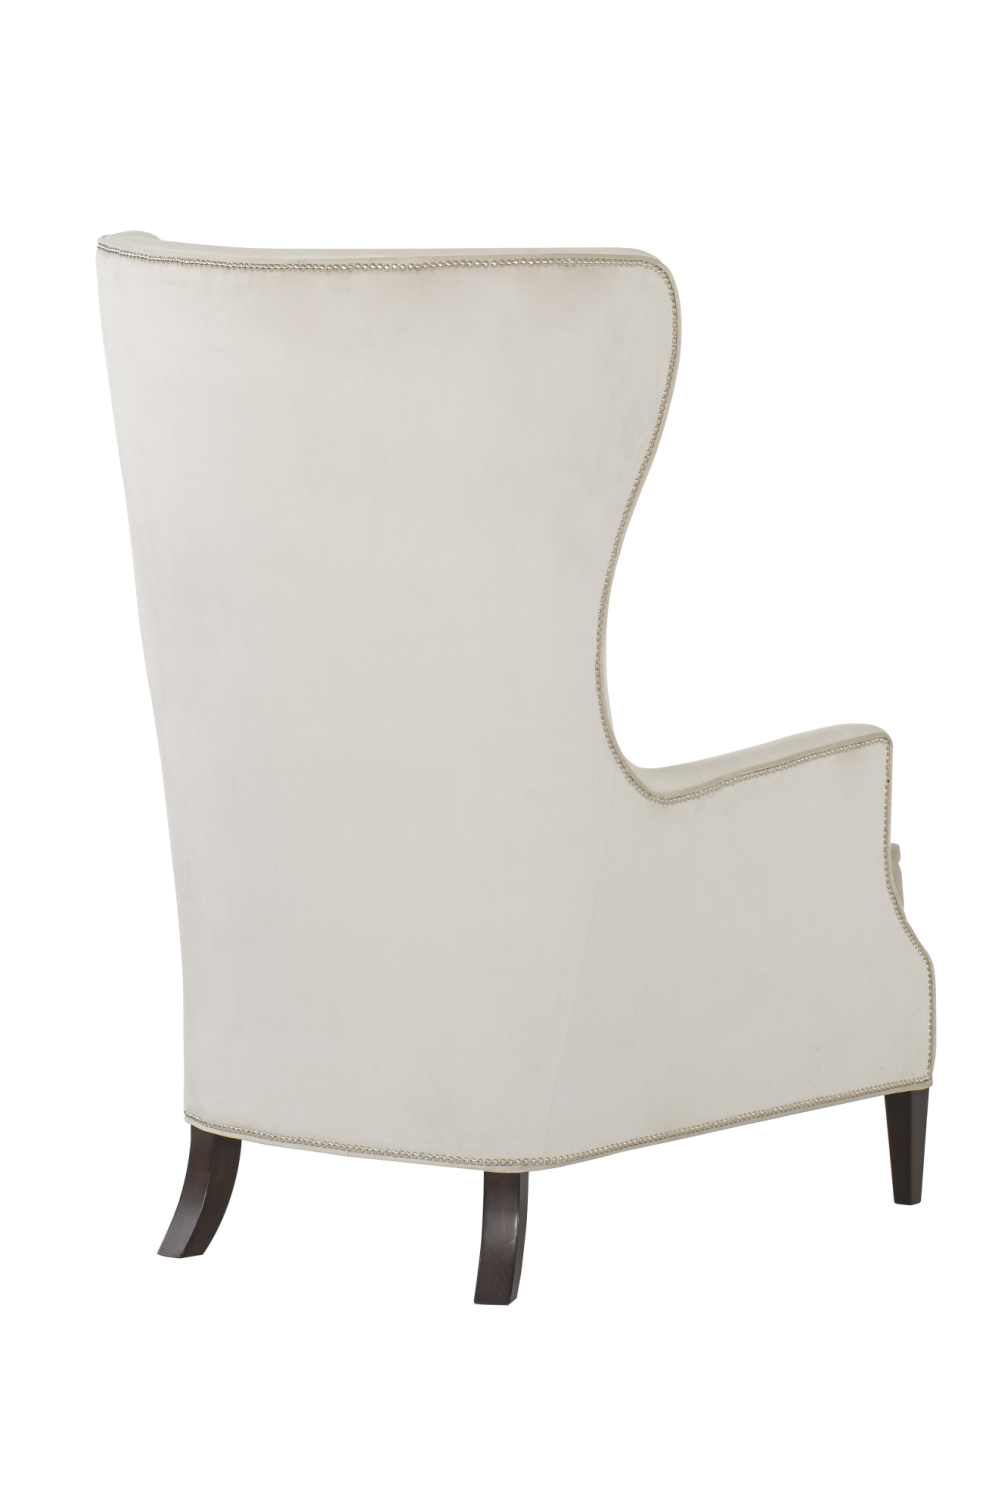 Beige Upholstery Tufted Accent Chair | Andrew Martin Justin | OROA.com